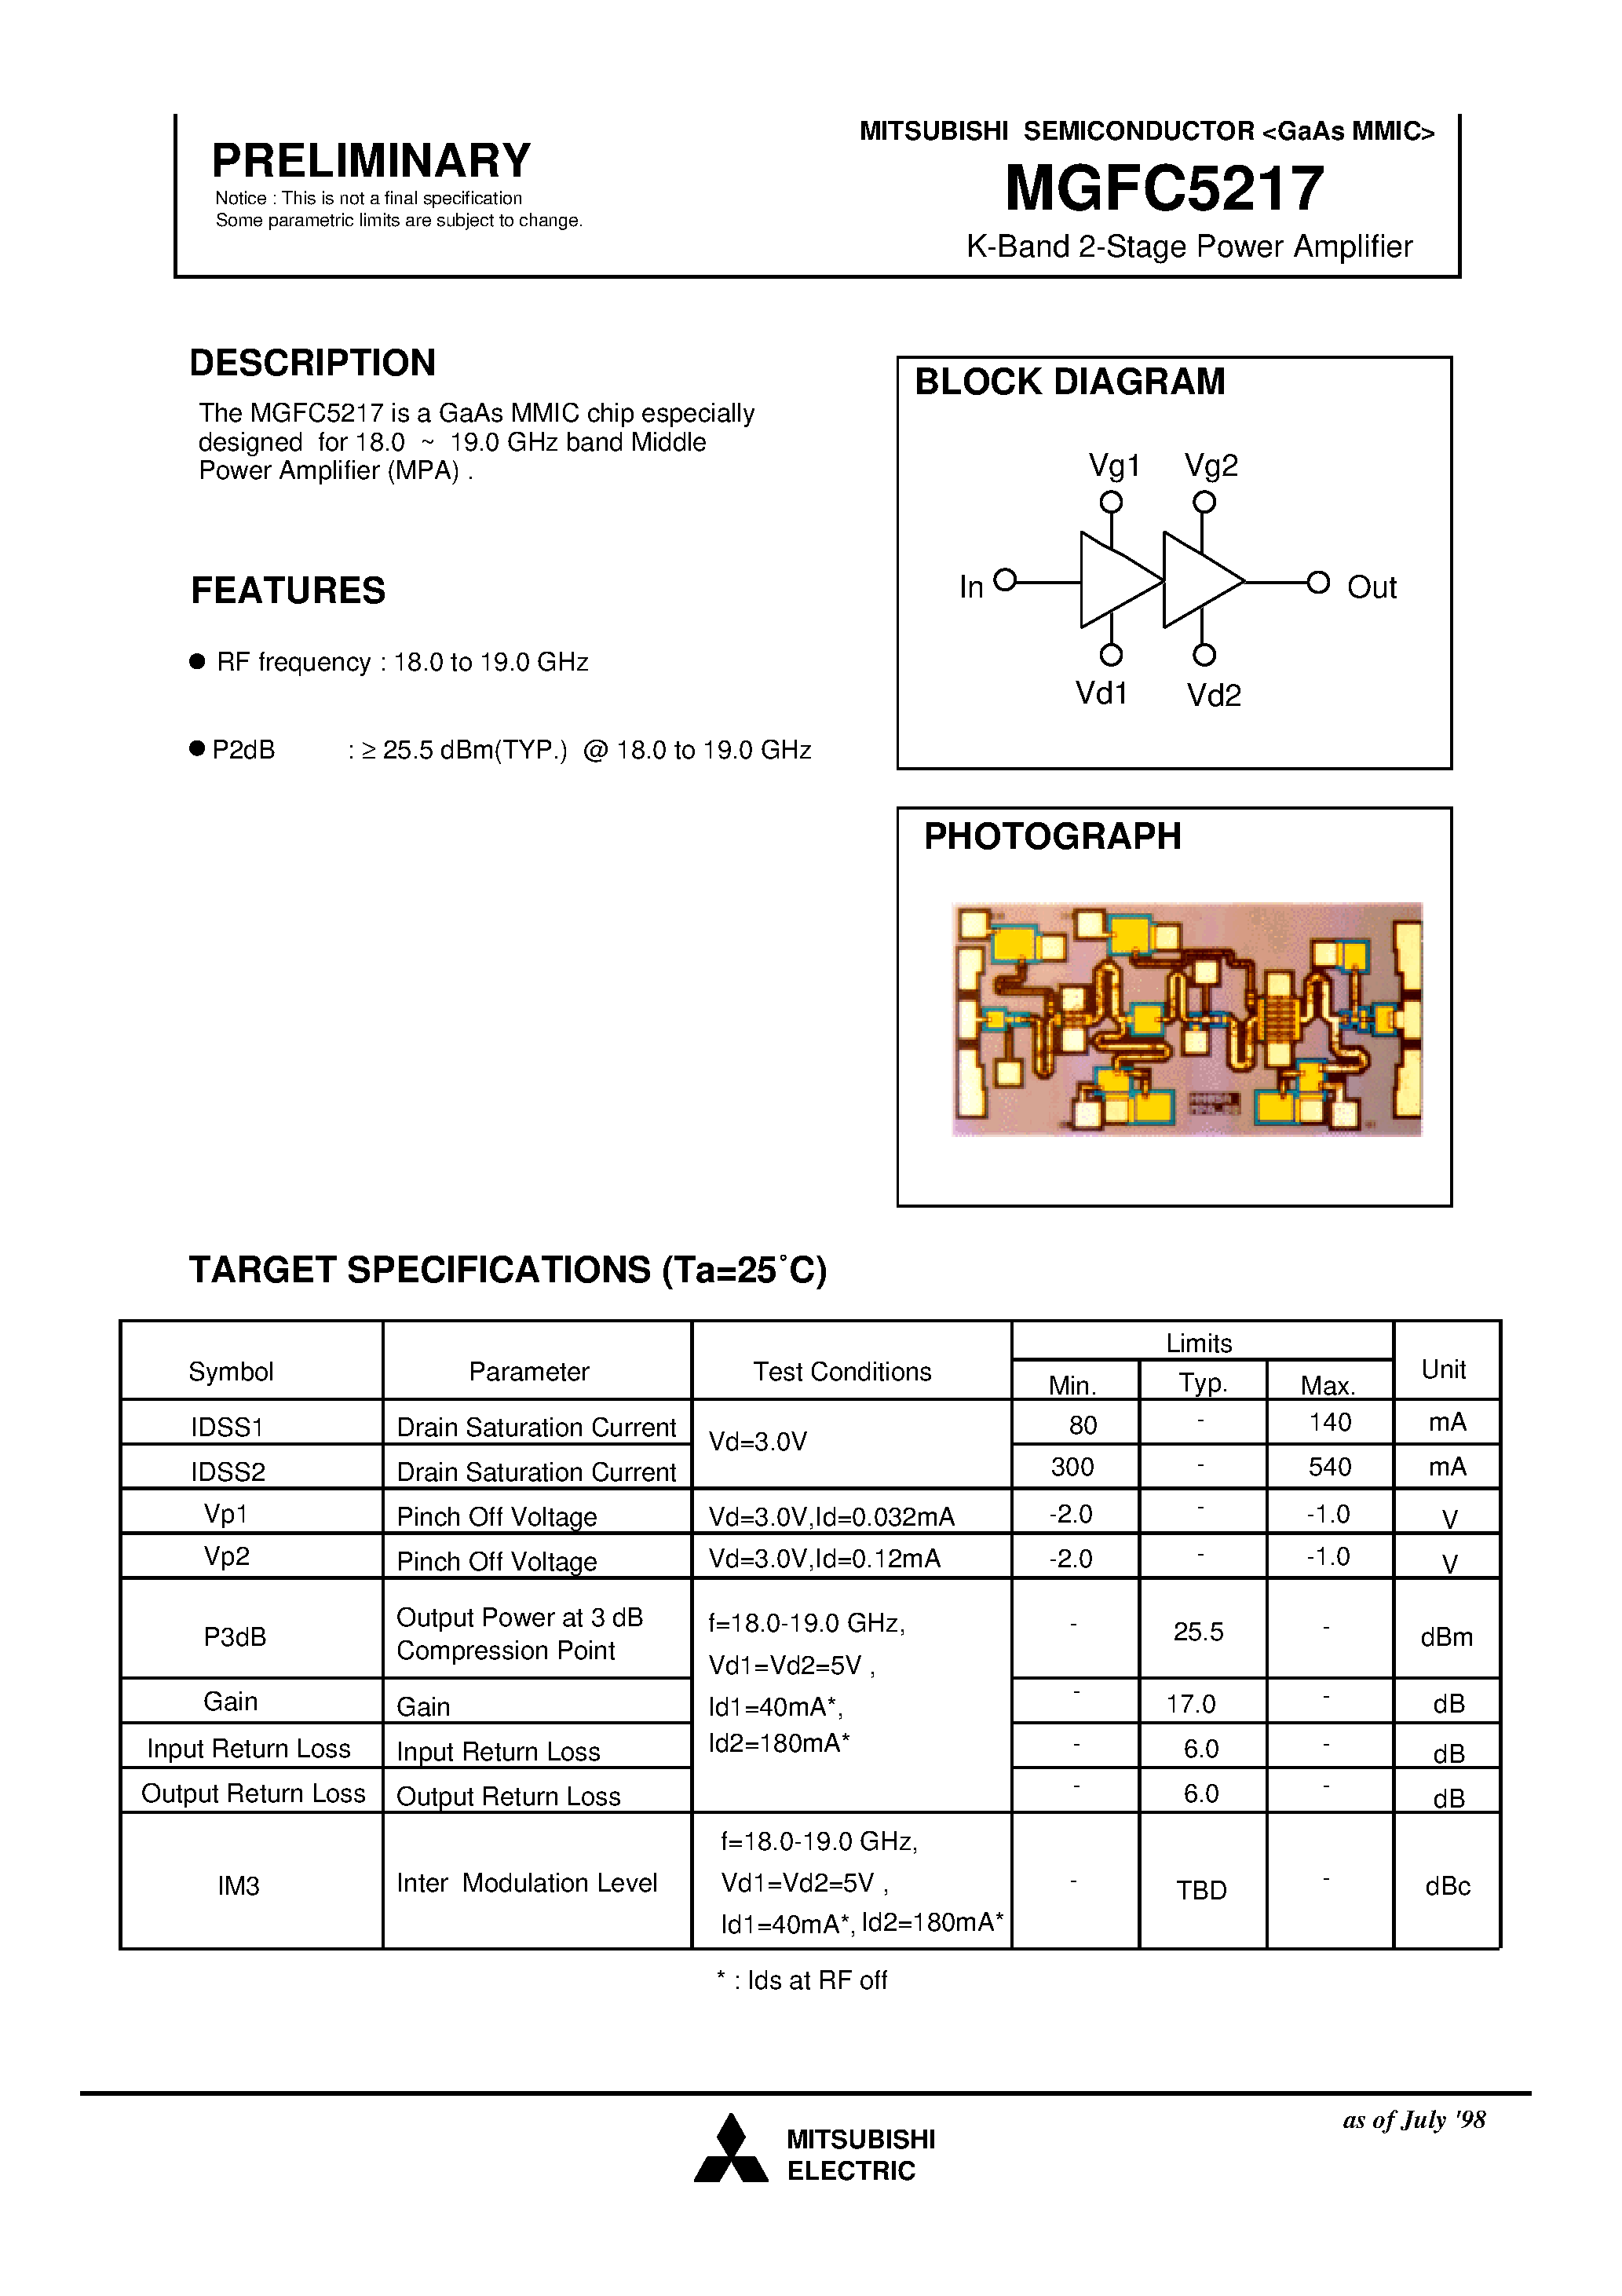 Datasheet MGFC5217 - K-Band 2-Stage Power Amplifier page 1